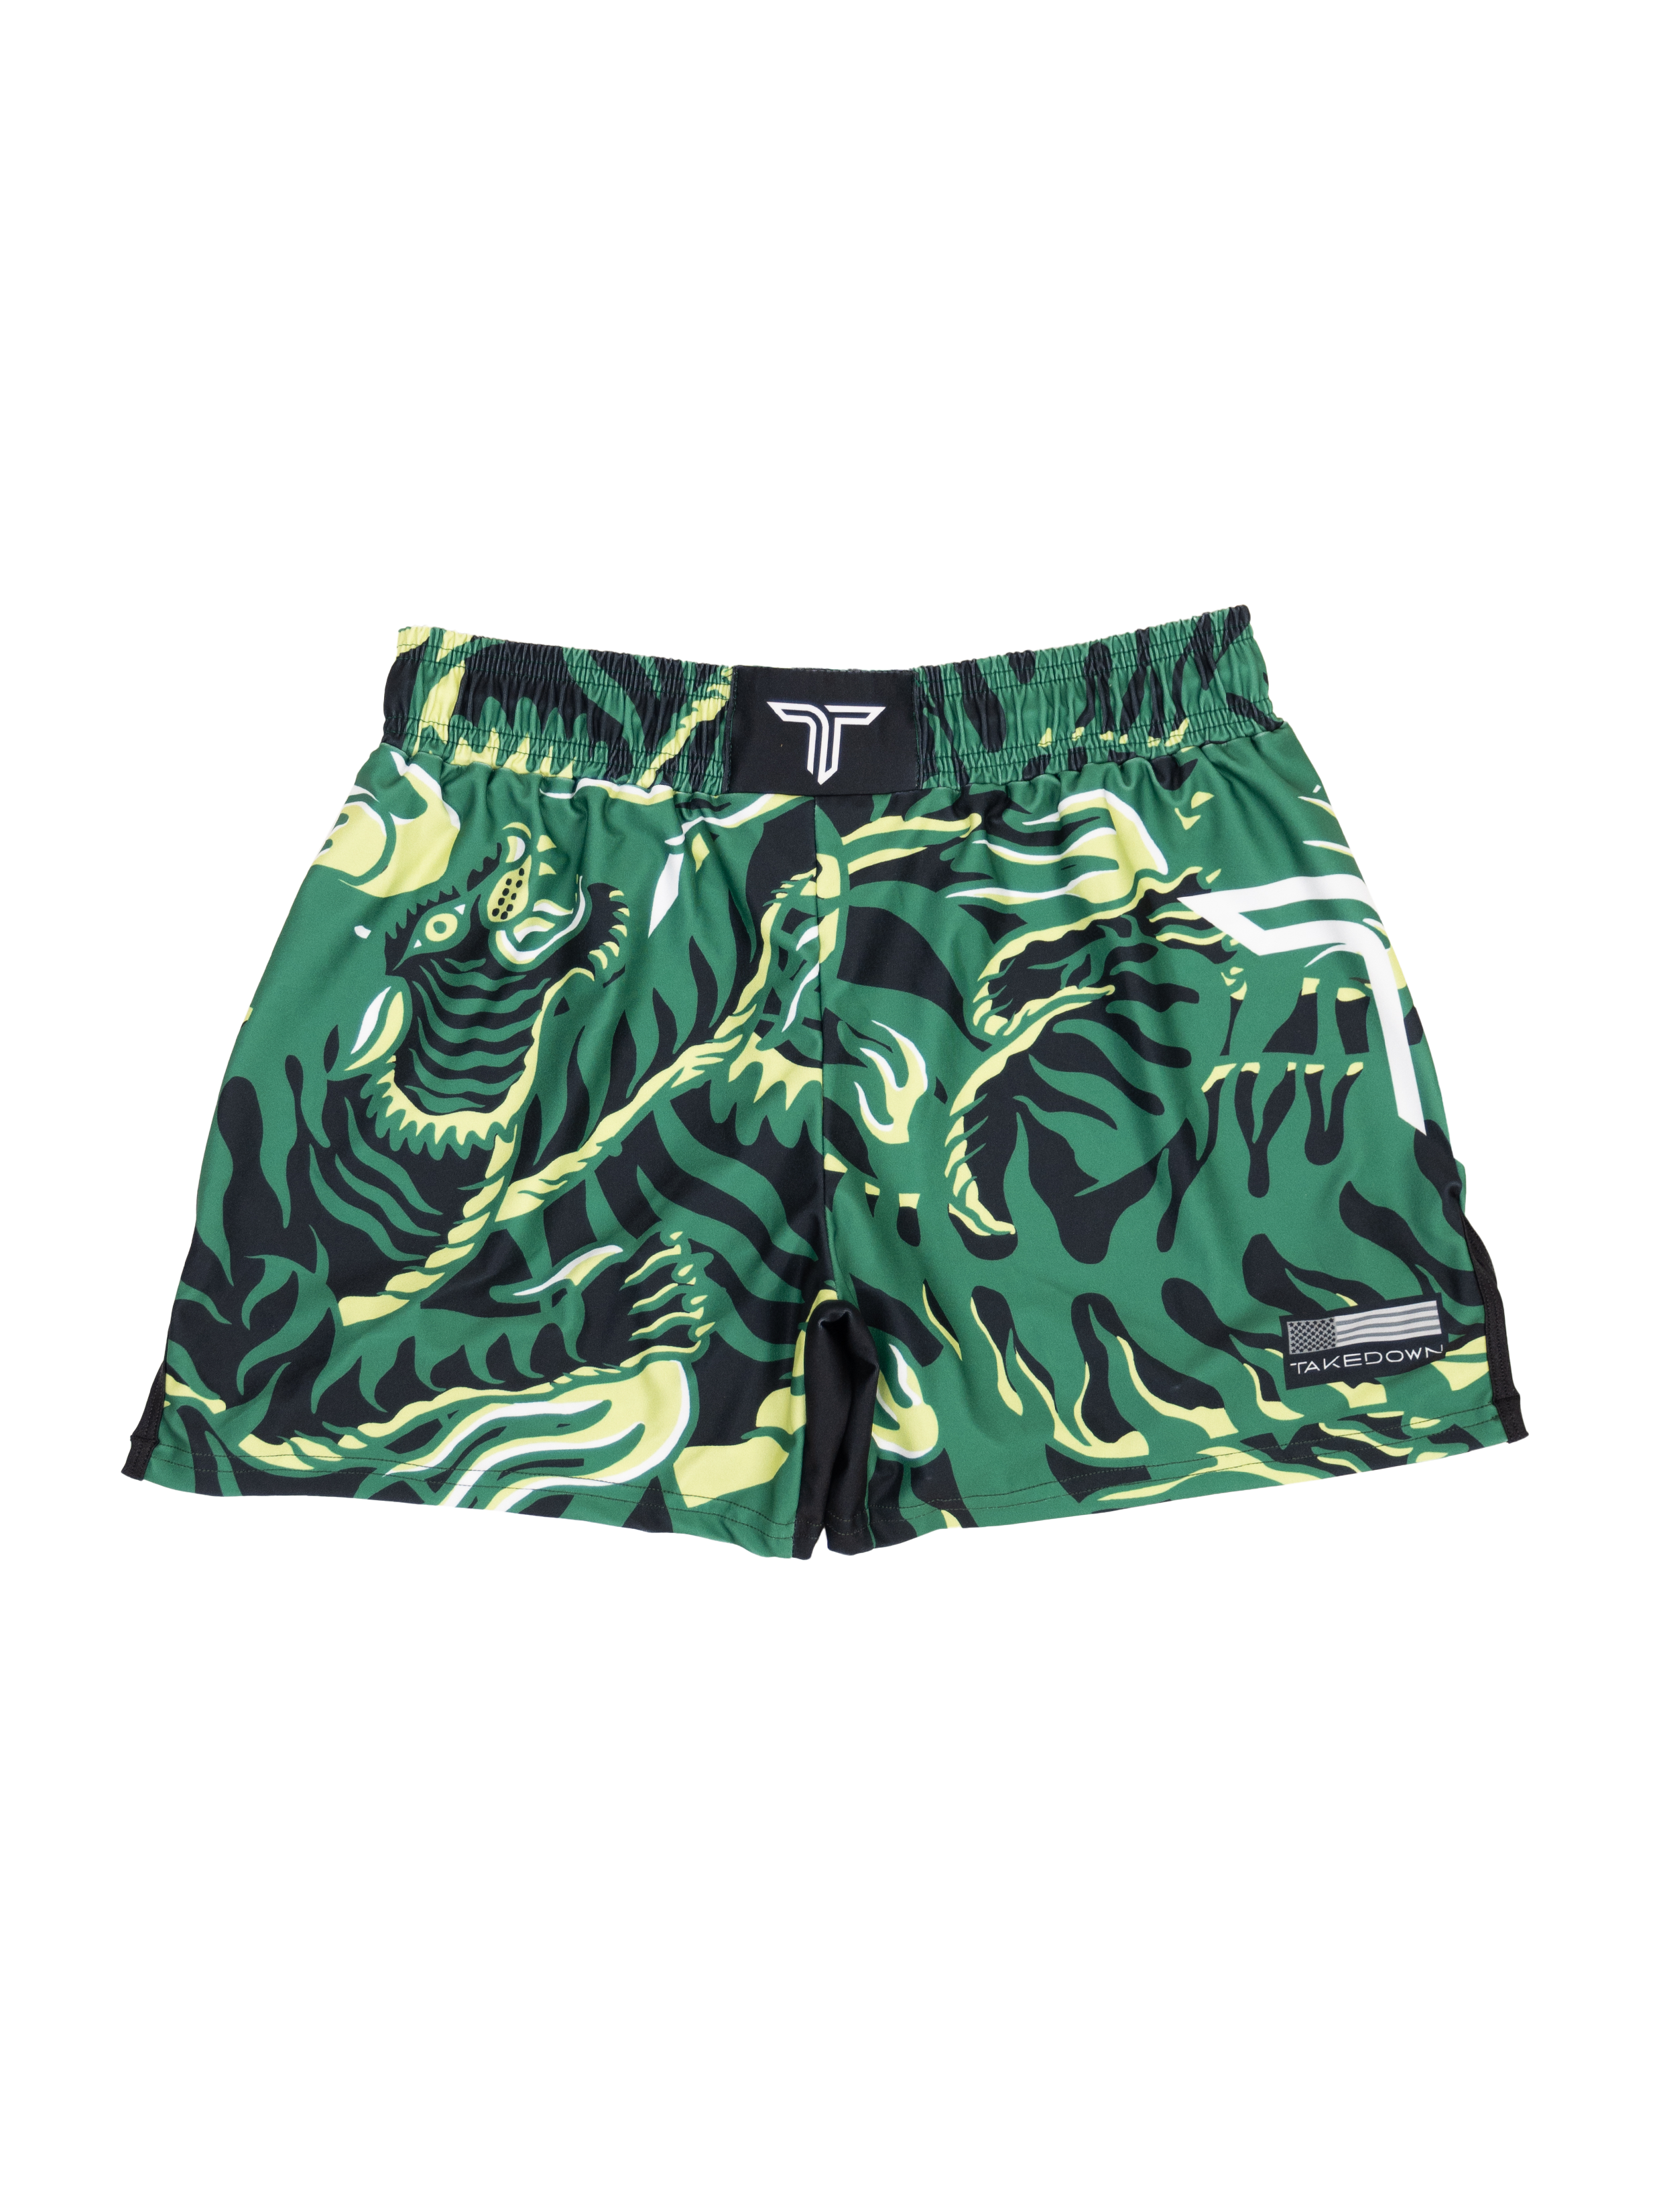 'Tiger Fight' Women's Fight Shorts - Bamboo Green (3